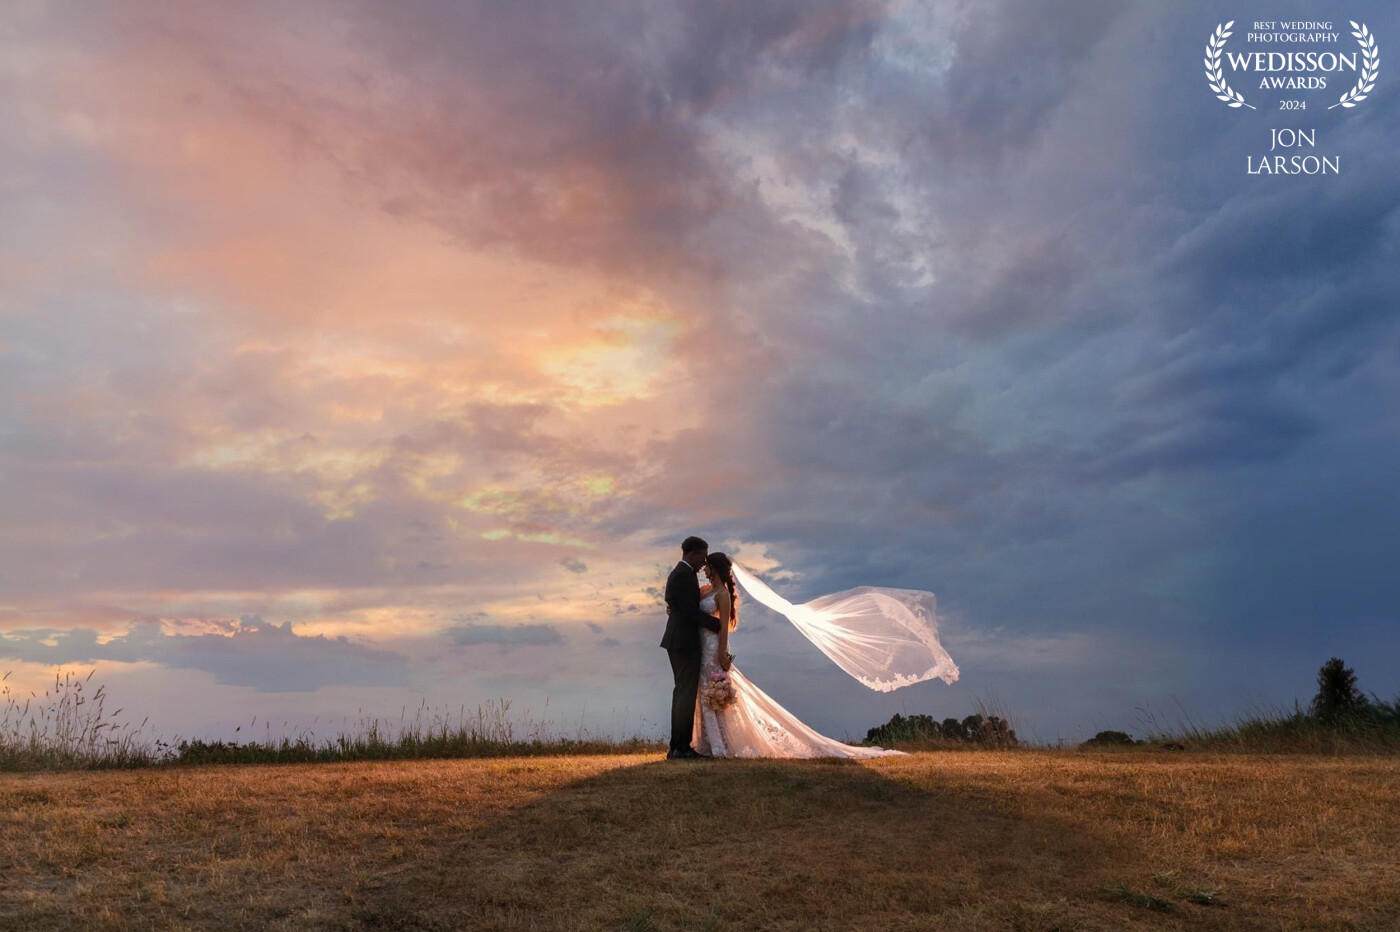 The bride and groom shared a very private moment a top of a hill just as a storm was swallowing up the sunset causing a unique coloring in the sky!